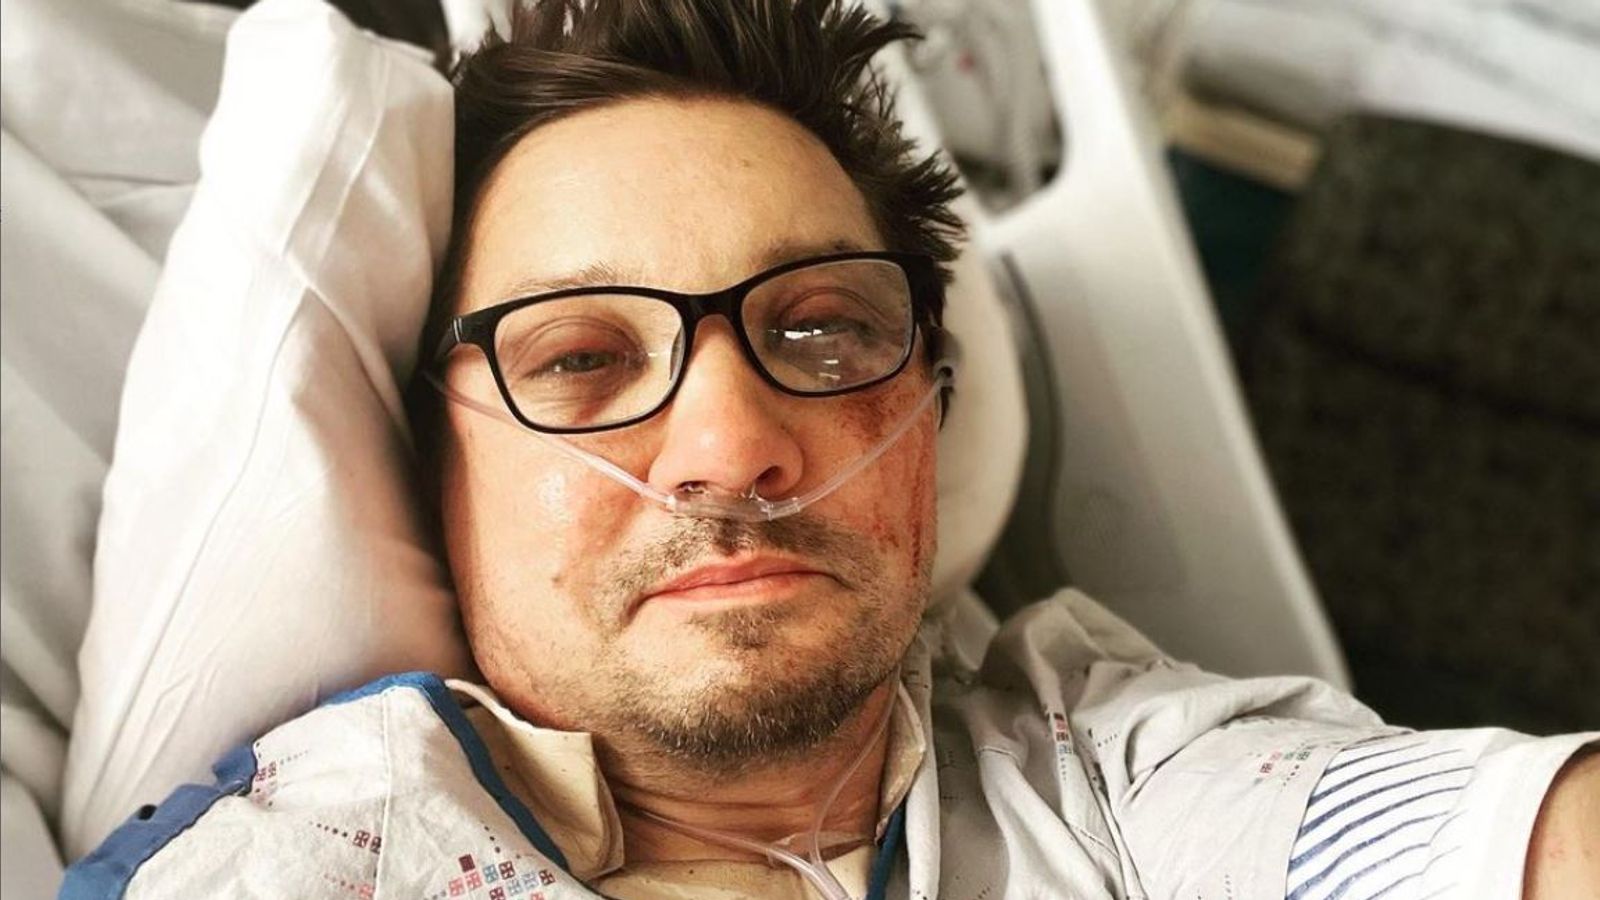 Jeremy Renner's 911 call reveals how Marvel star was 'completely crushed' in accident